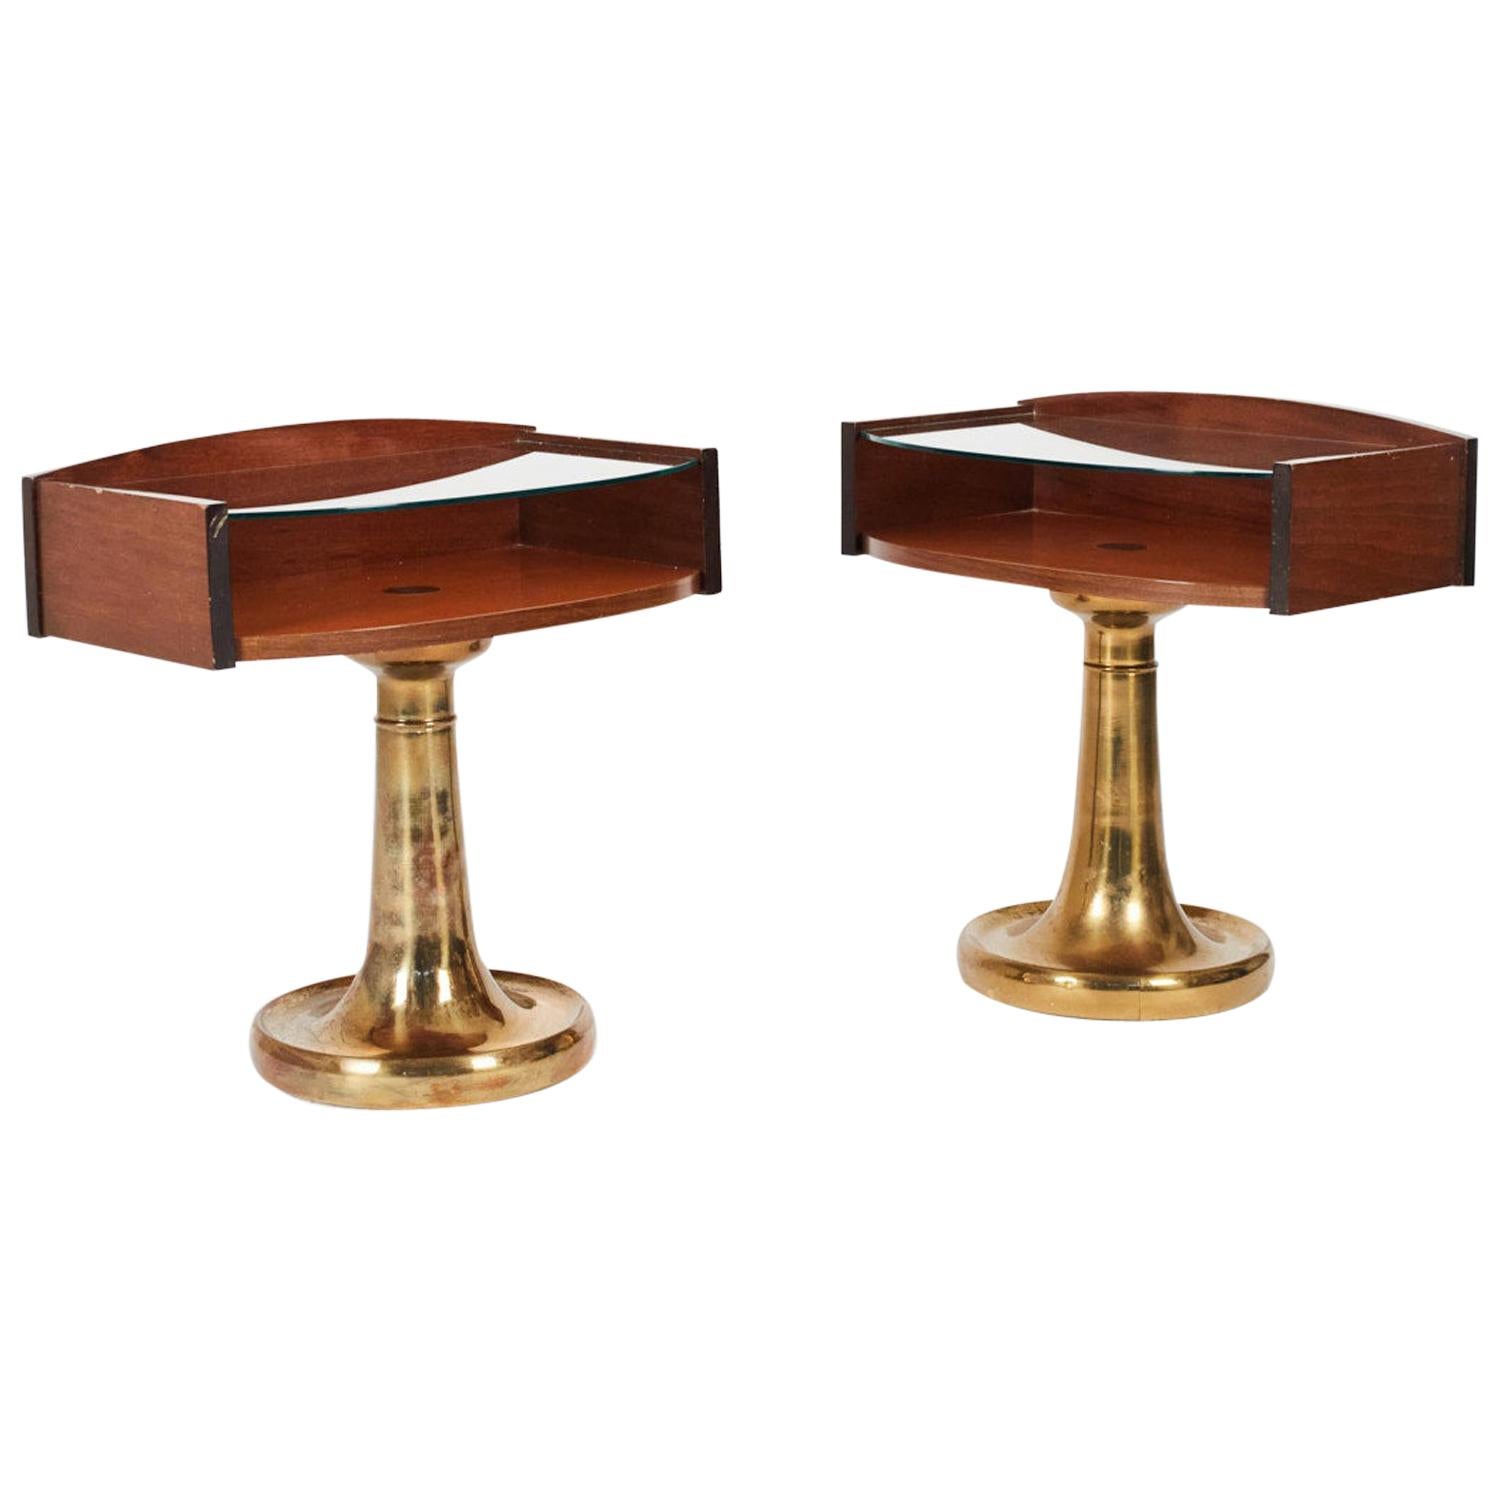 Pair of Frigerio Night Tables from the 1970's